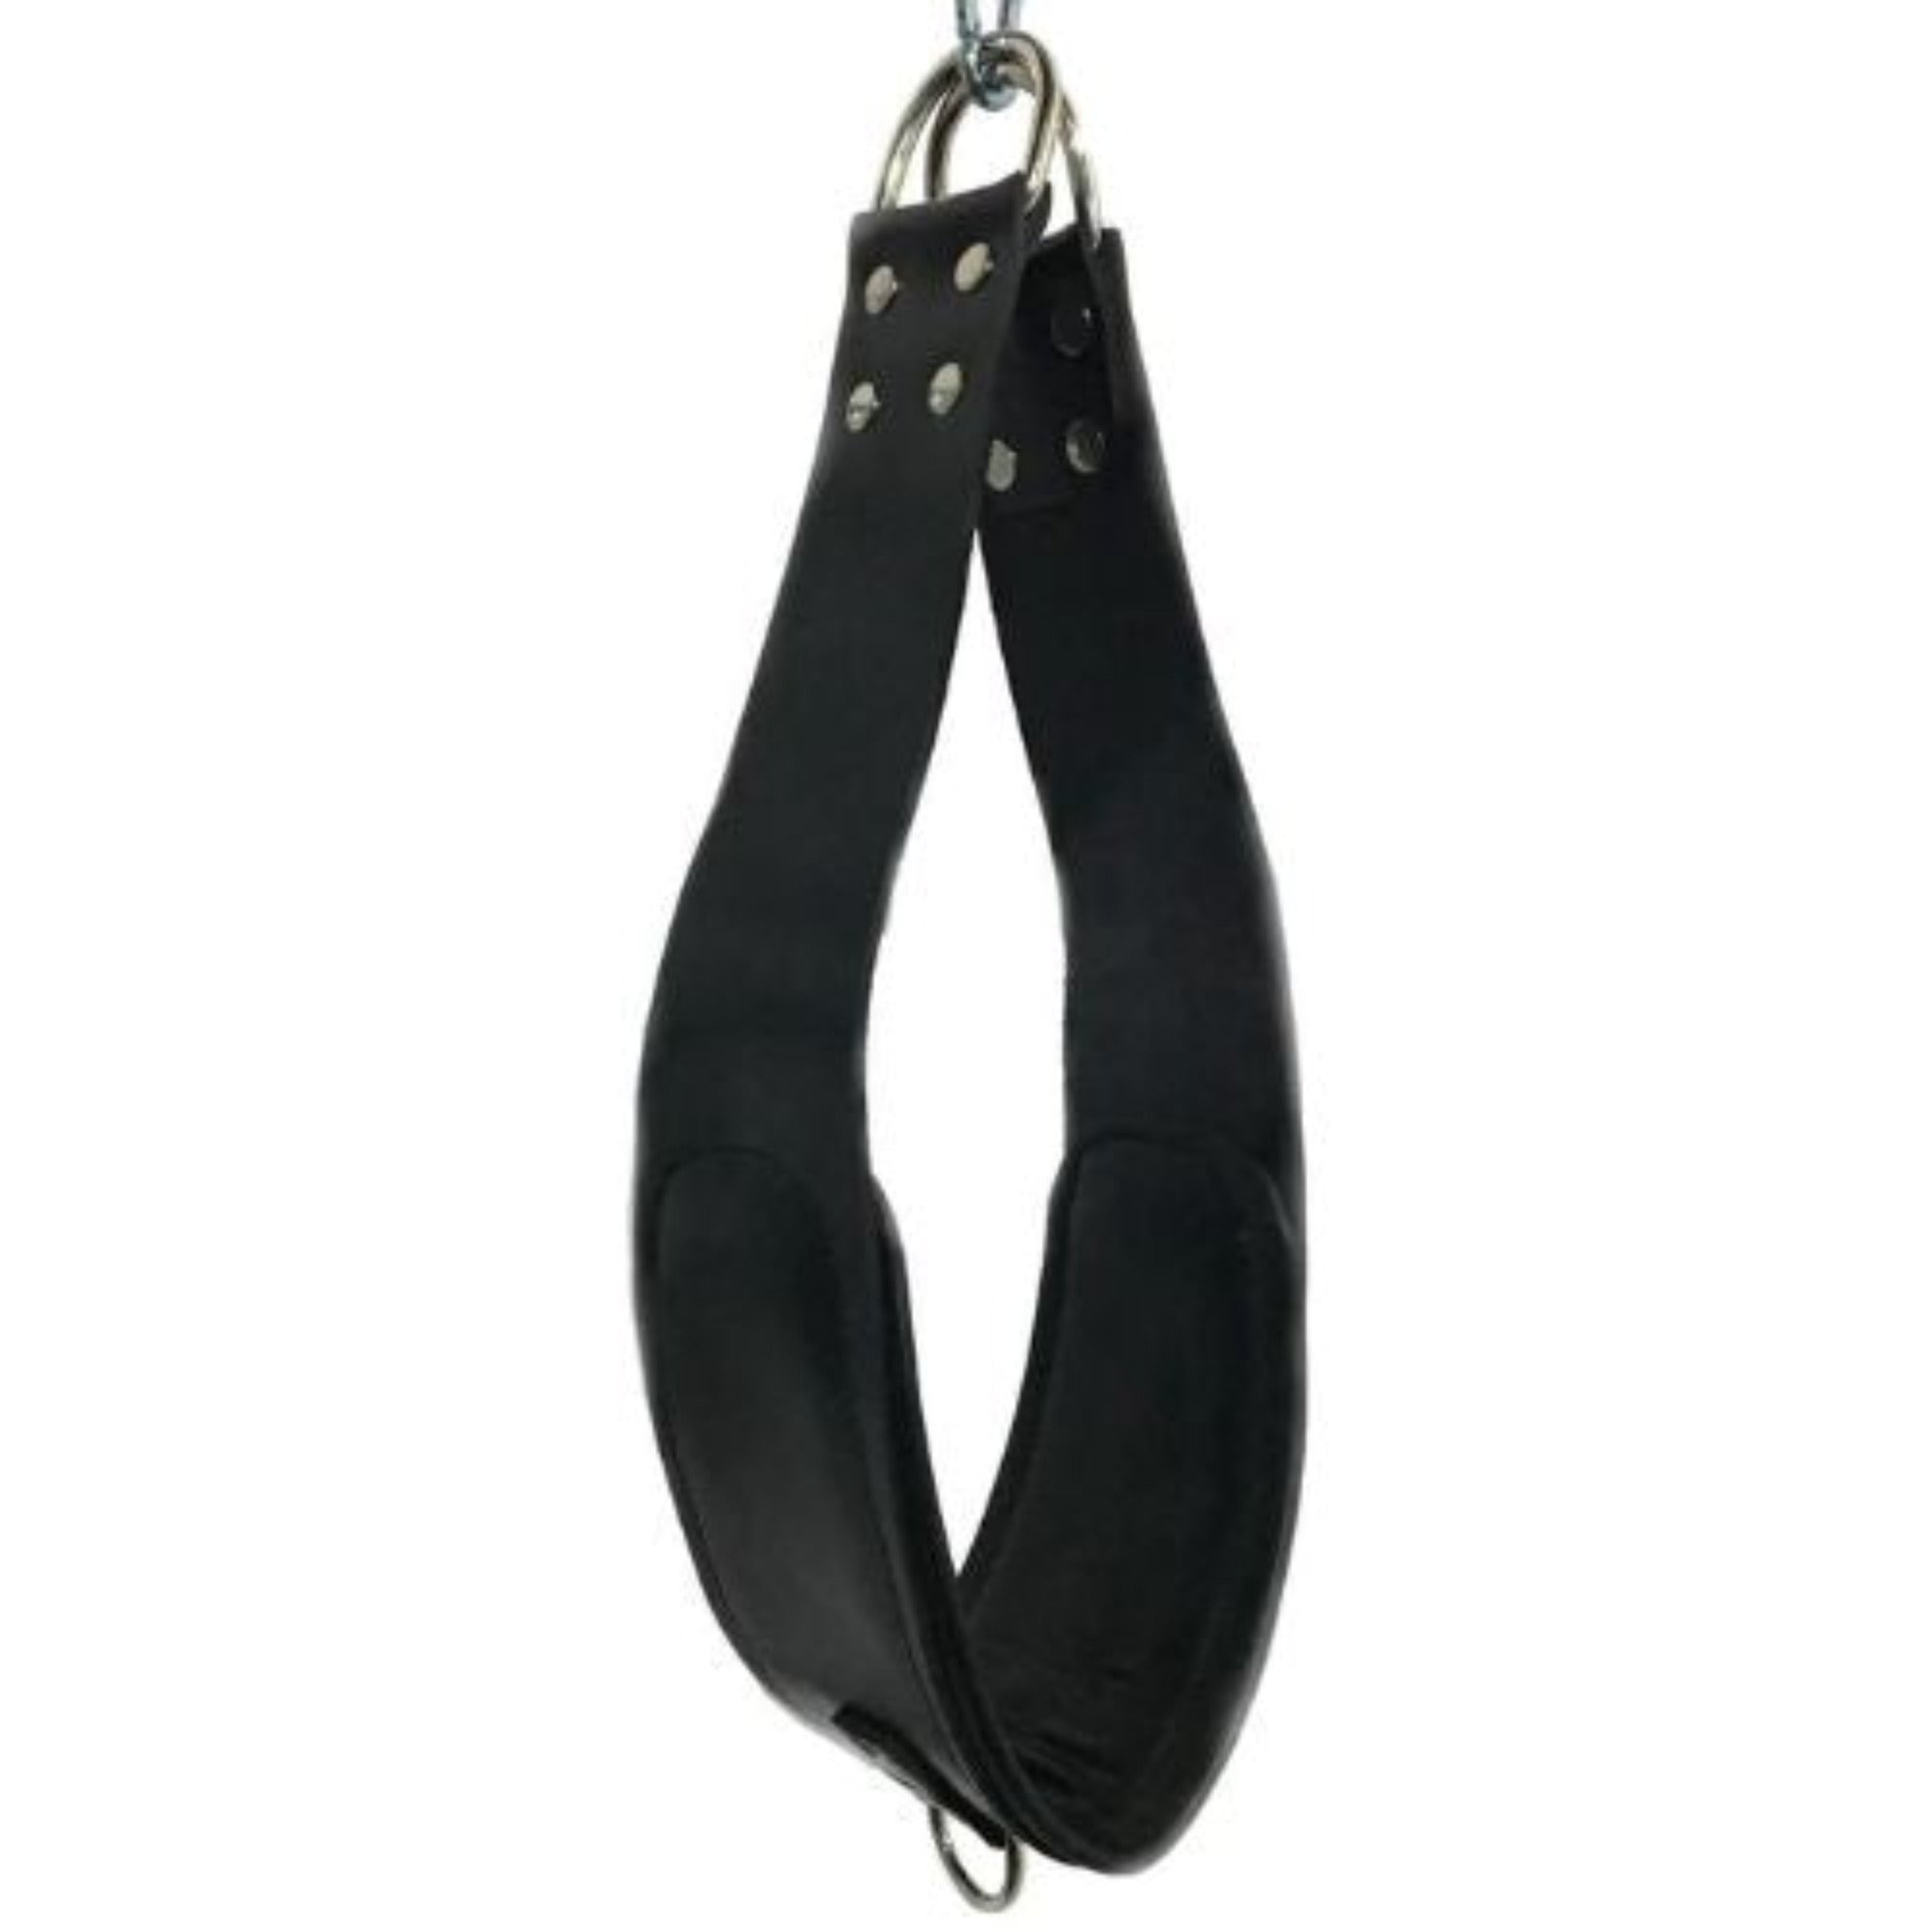 Exclusive VIP Black Leather Sex Swing